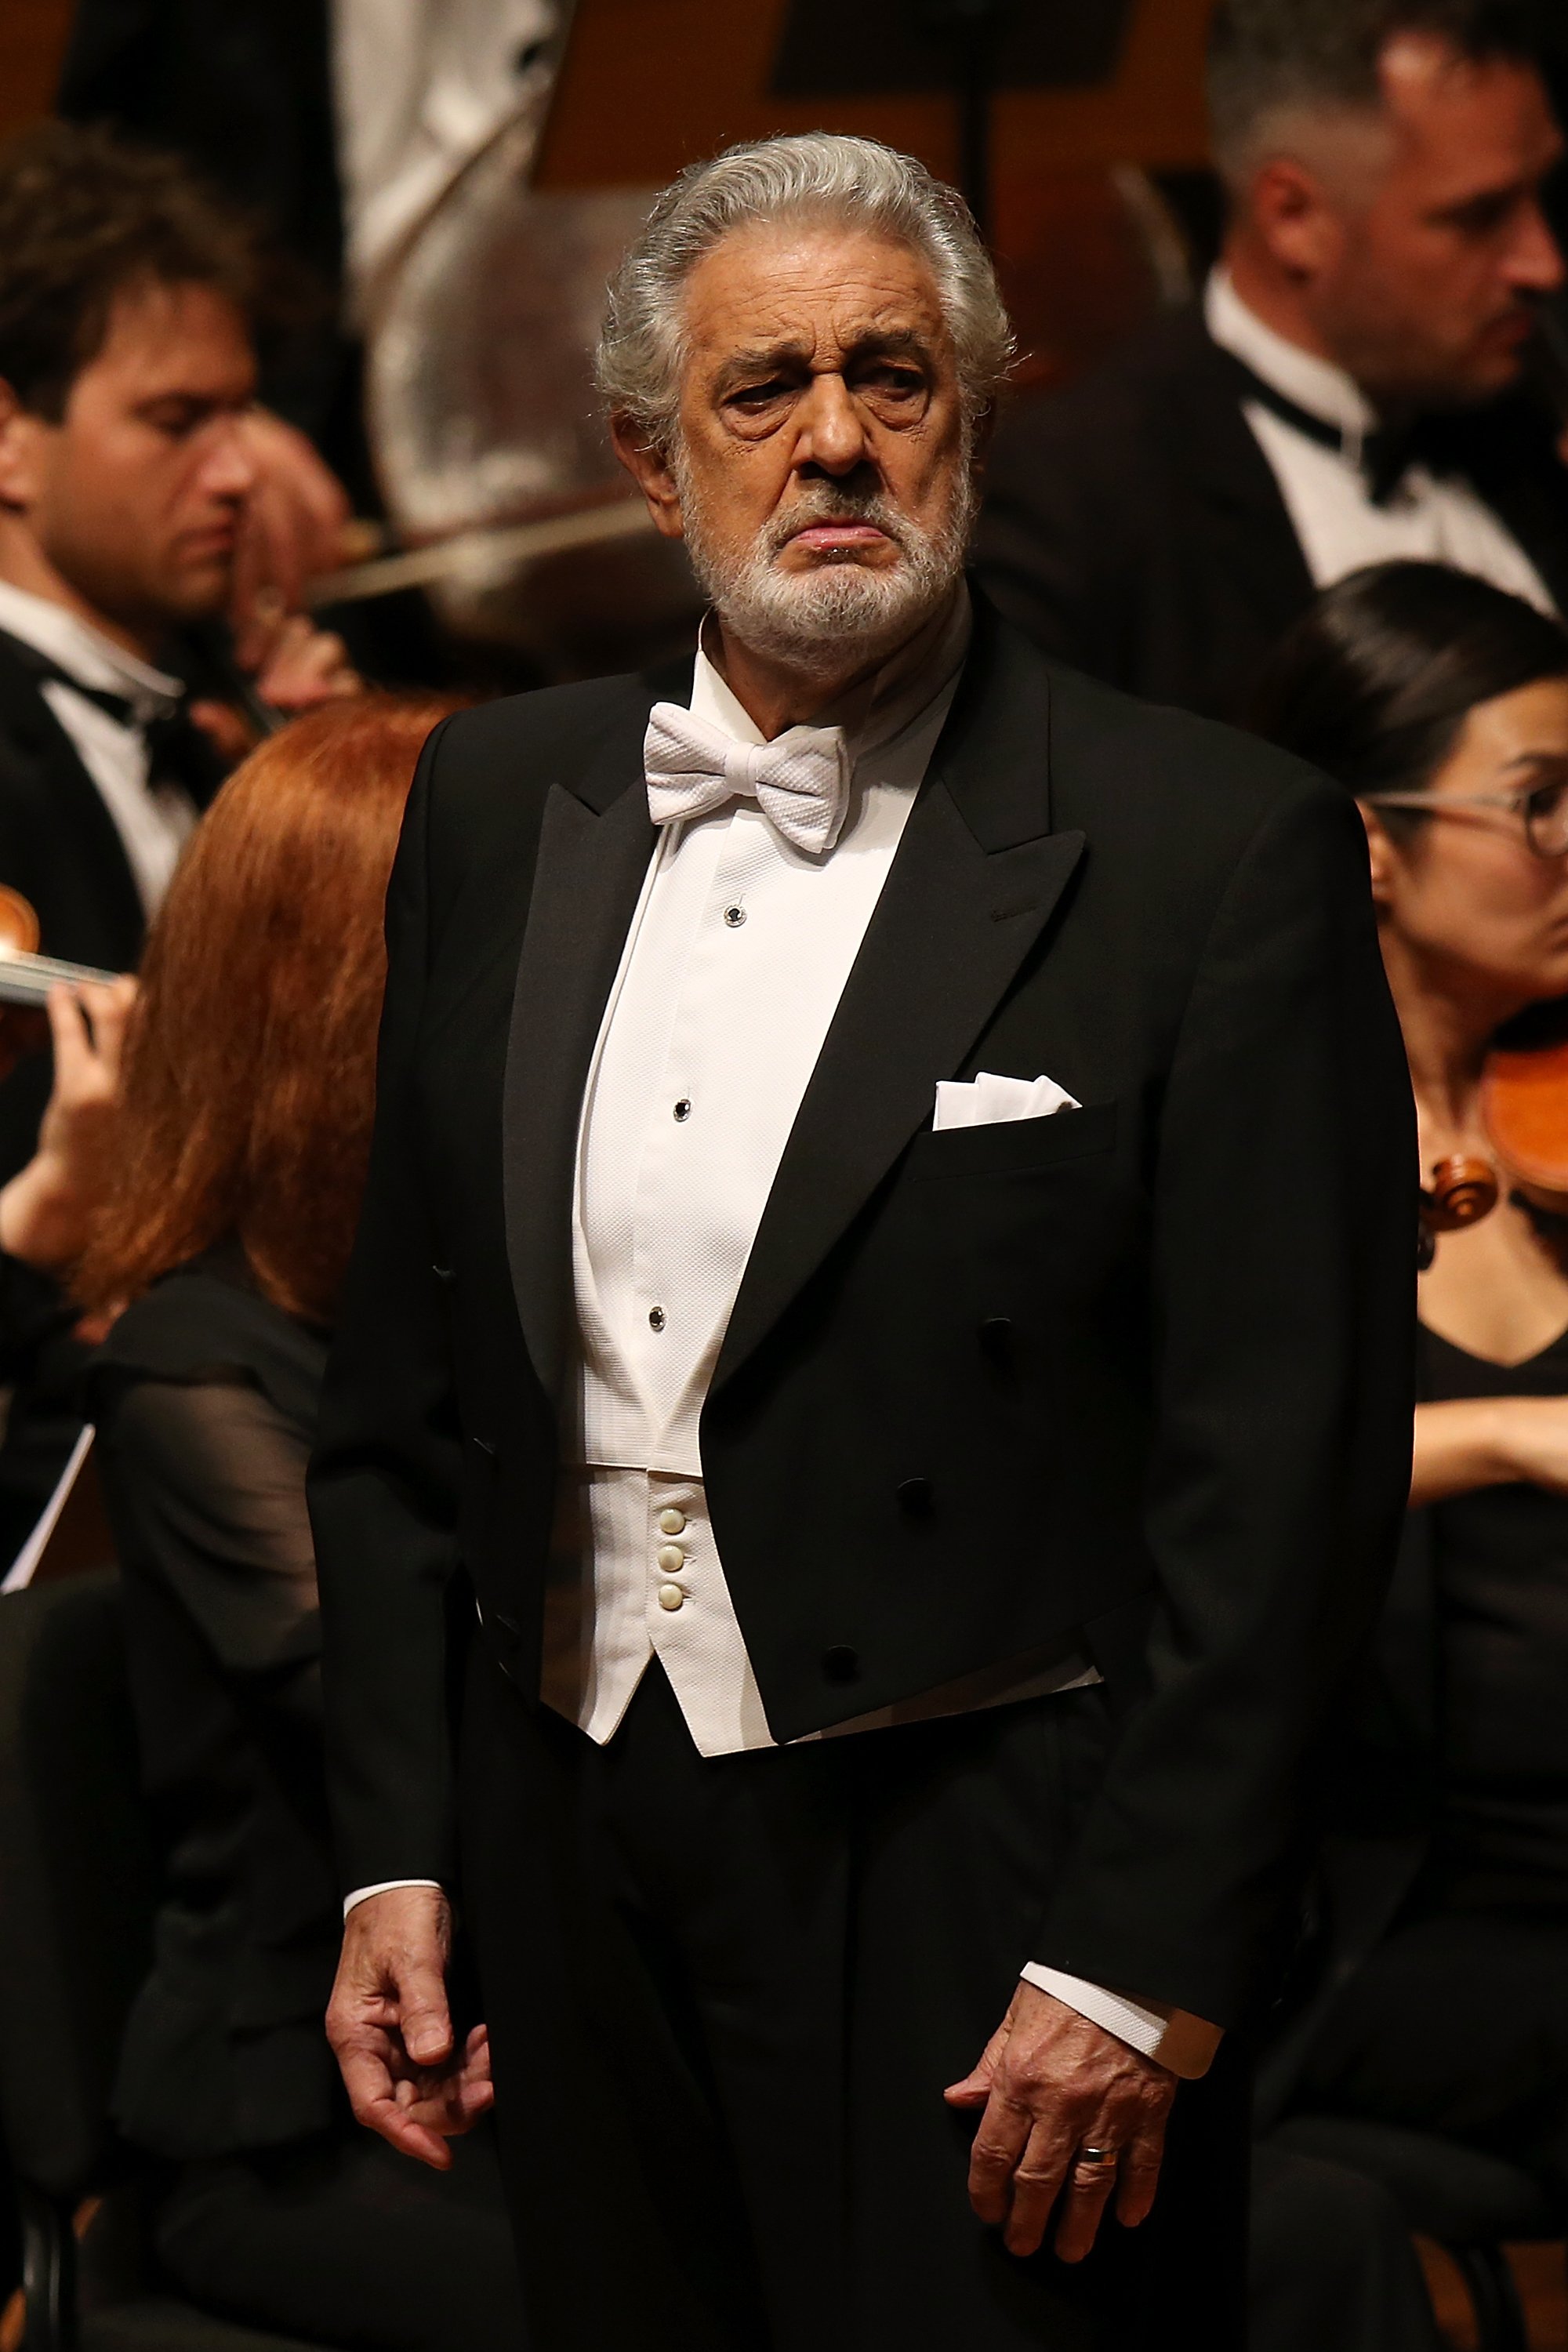 Placido Domingo performing onstage during LA Opera's Nabucco in Concert at the Musco Center for the Arts in Orange, California | Photo: Phillip Faraone/Getty Images for Musco Center for the Arts at Chapman University